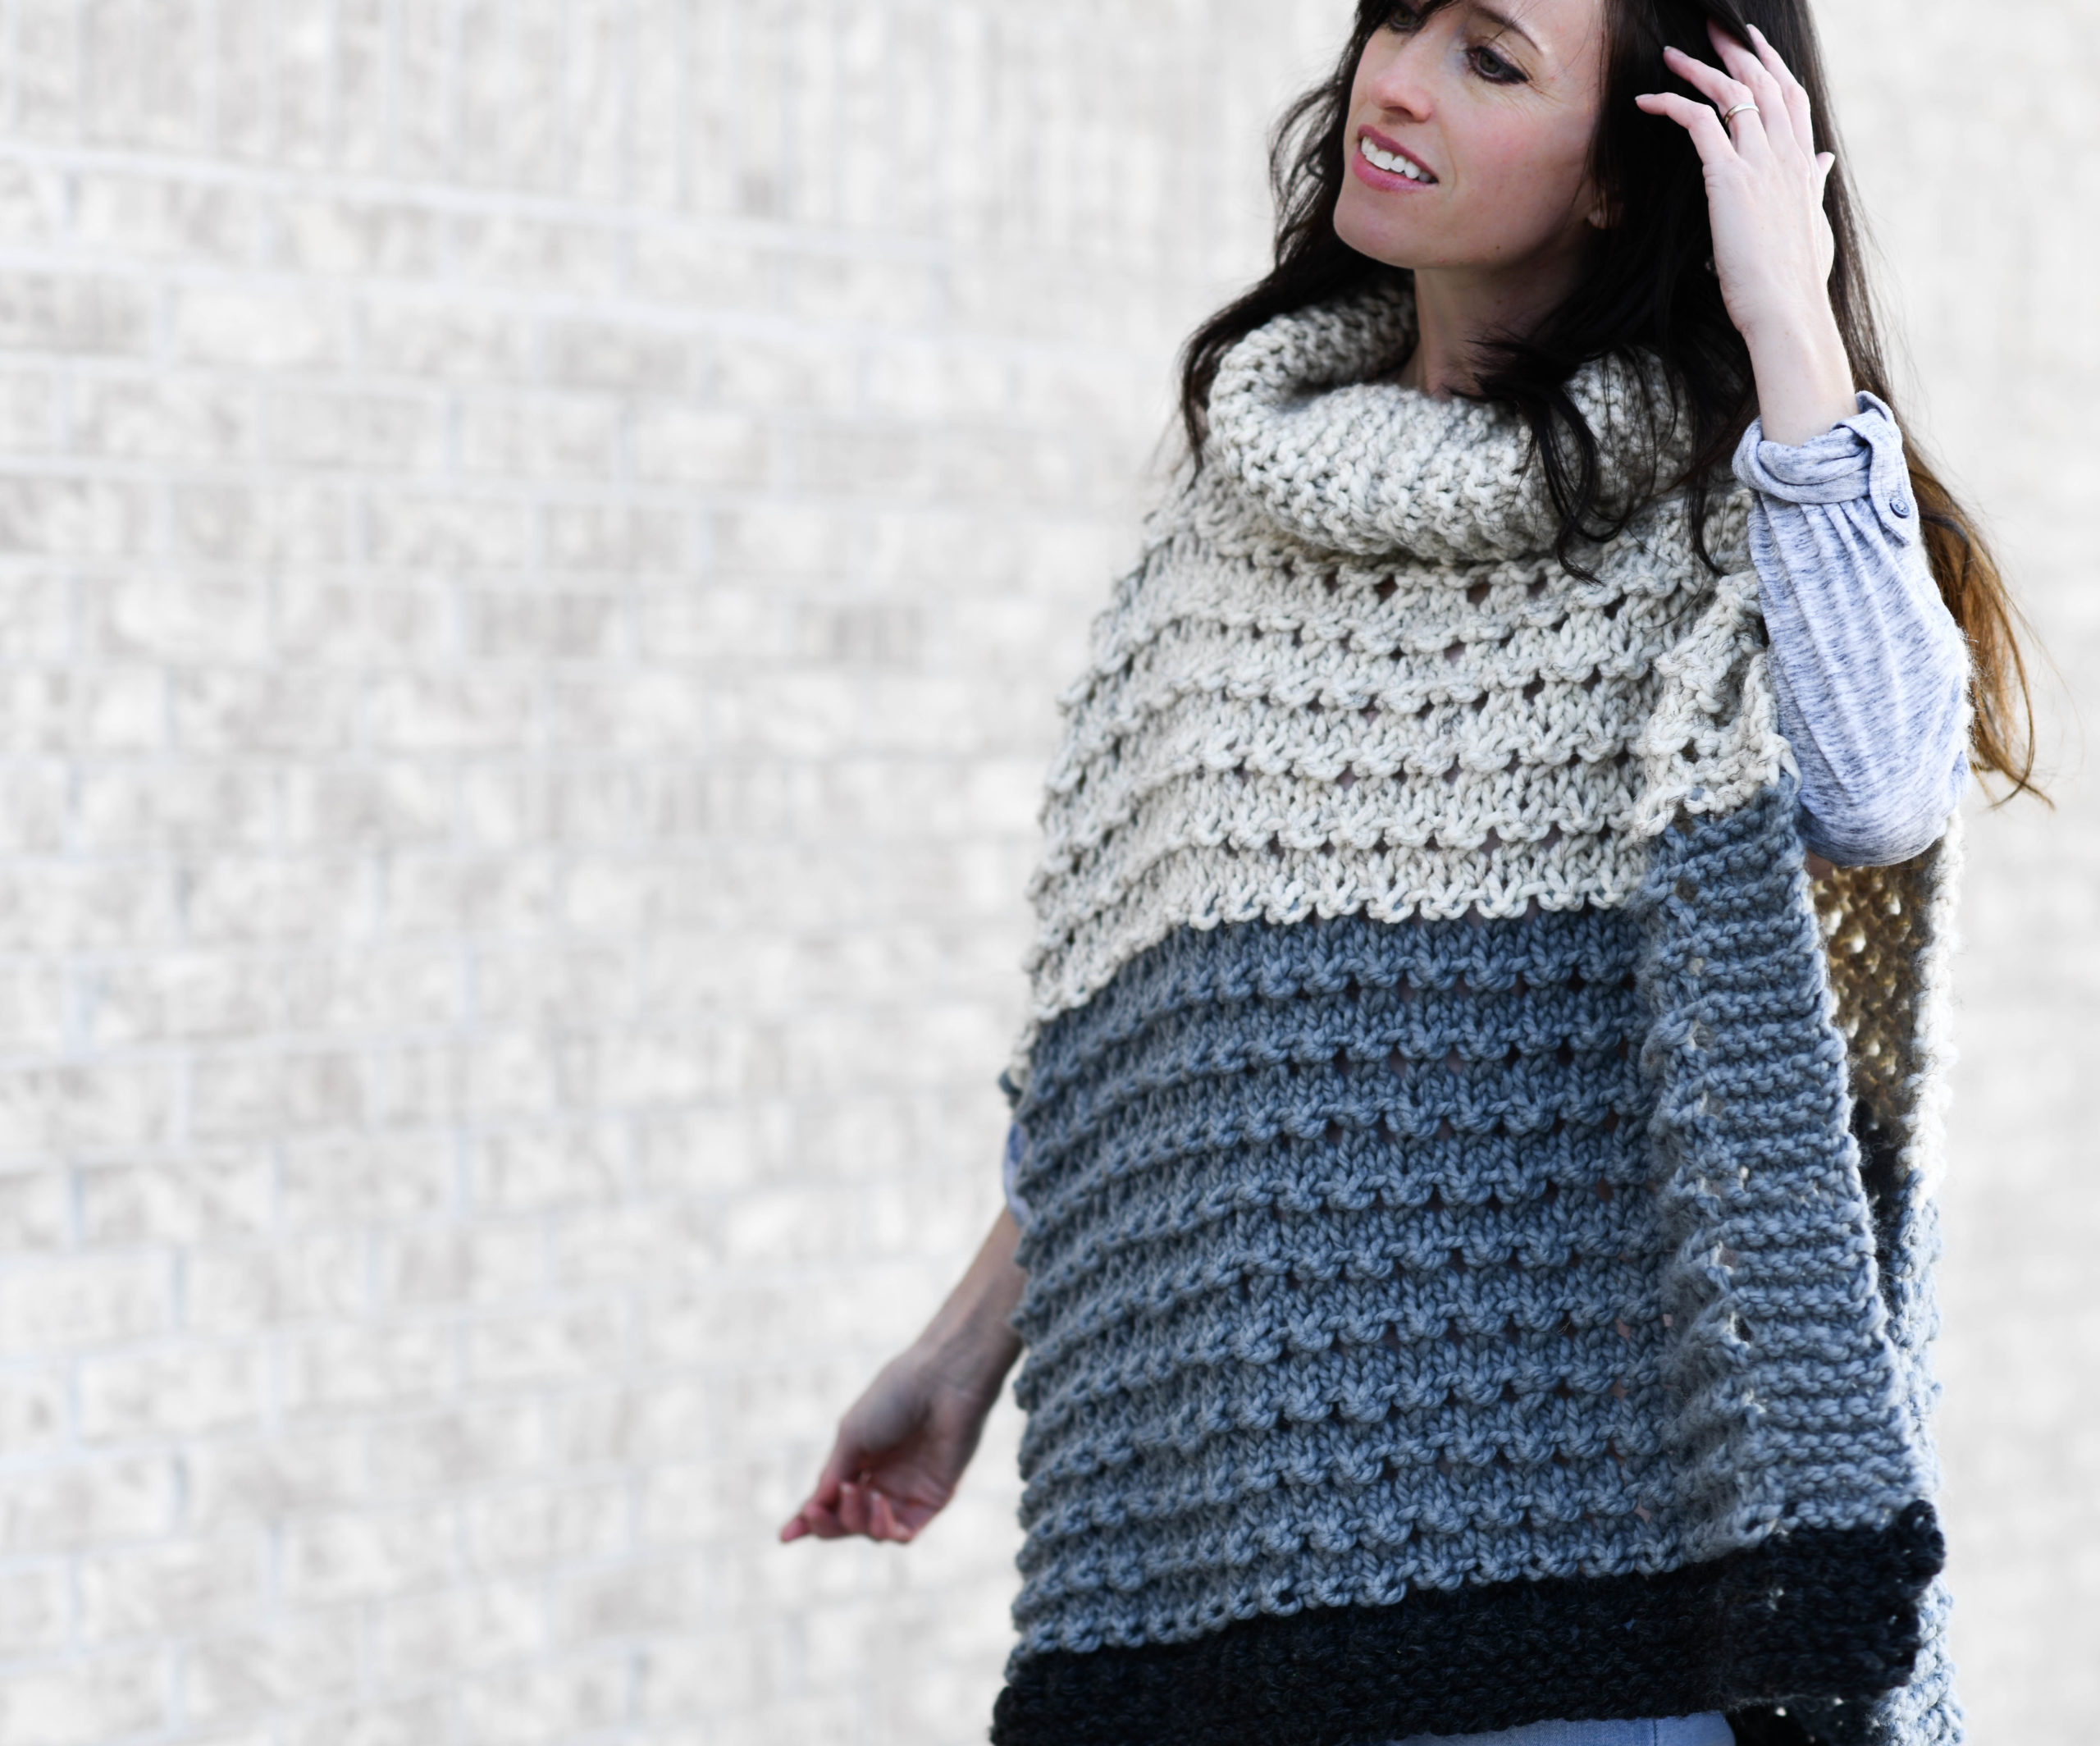 https://www.mamainastitch.com/wp-content/uploads/2018/12/Knit-Poncho-Easy-Pattern-4-scaled.jpg